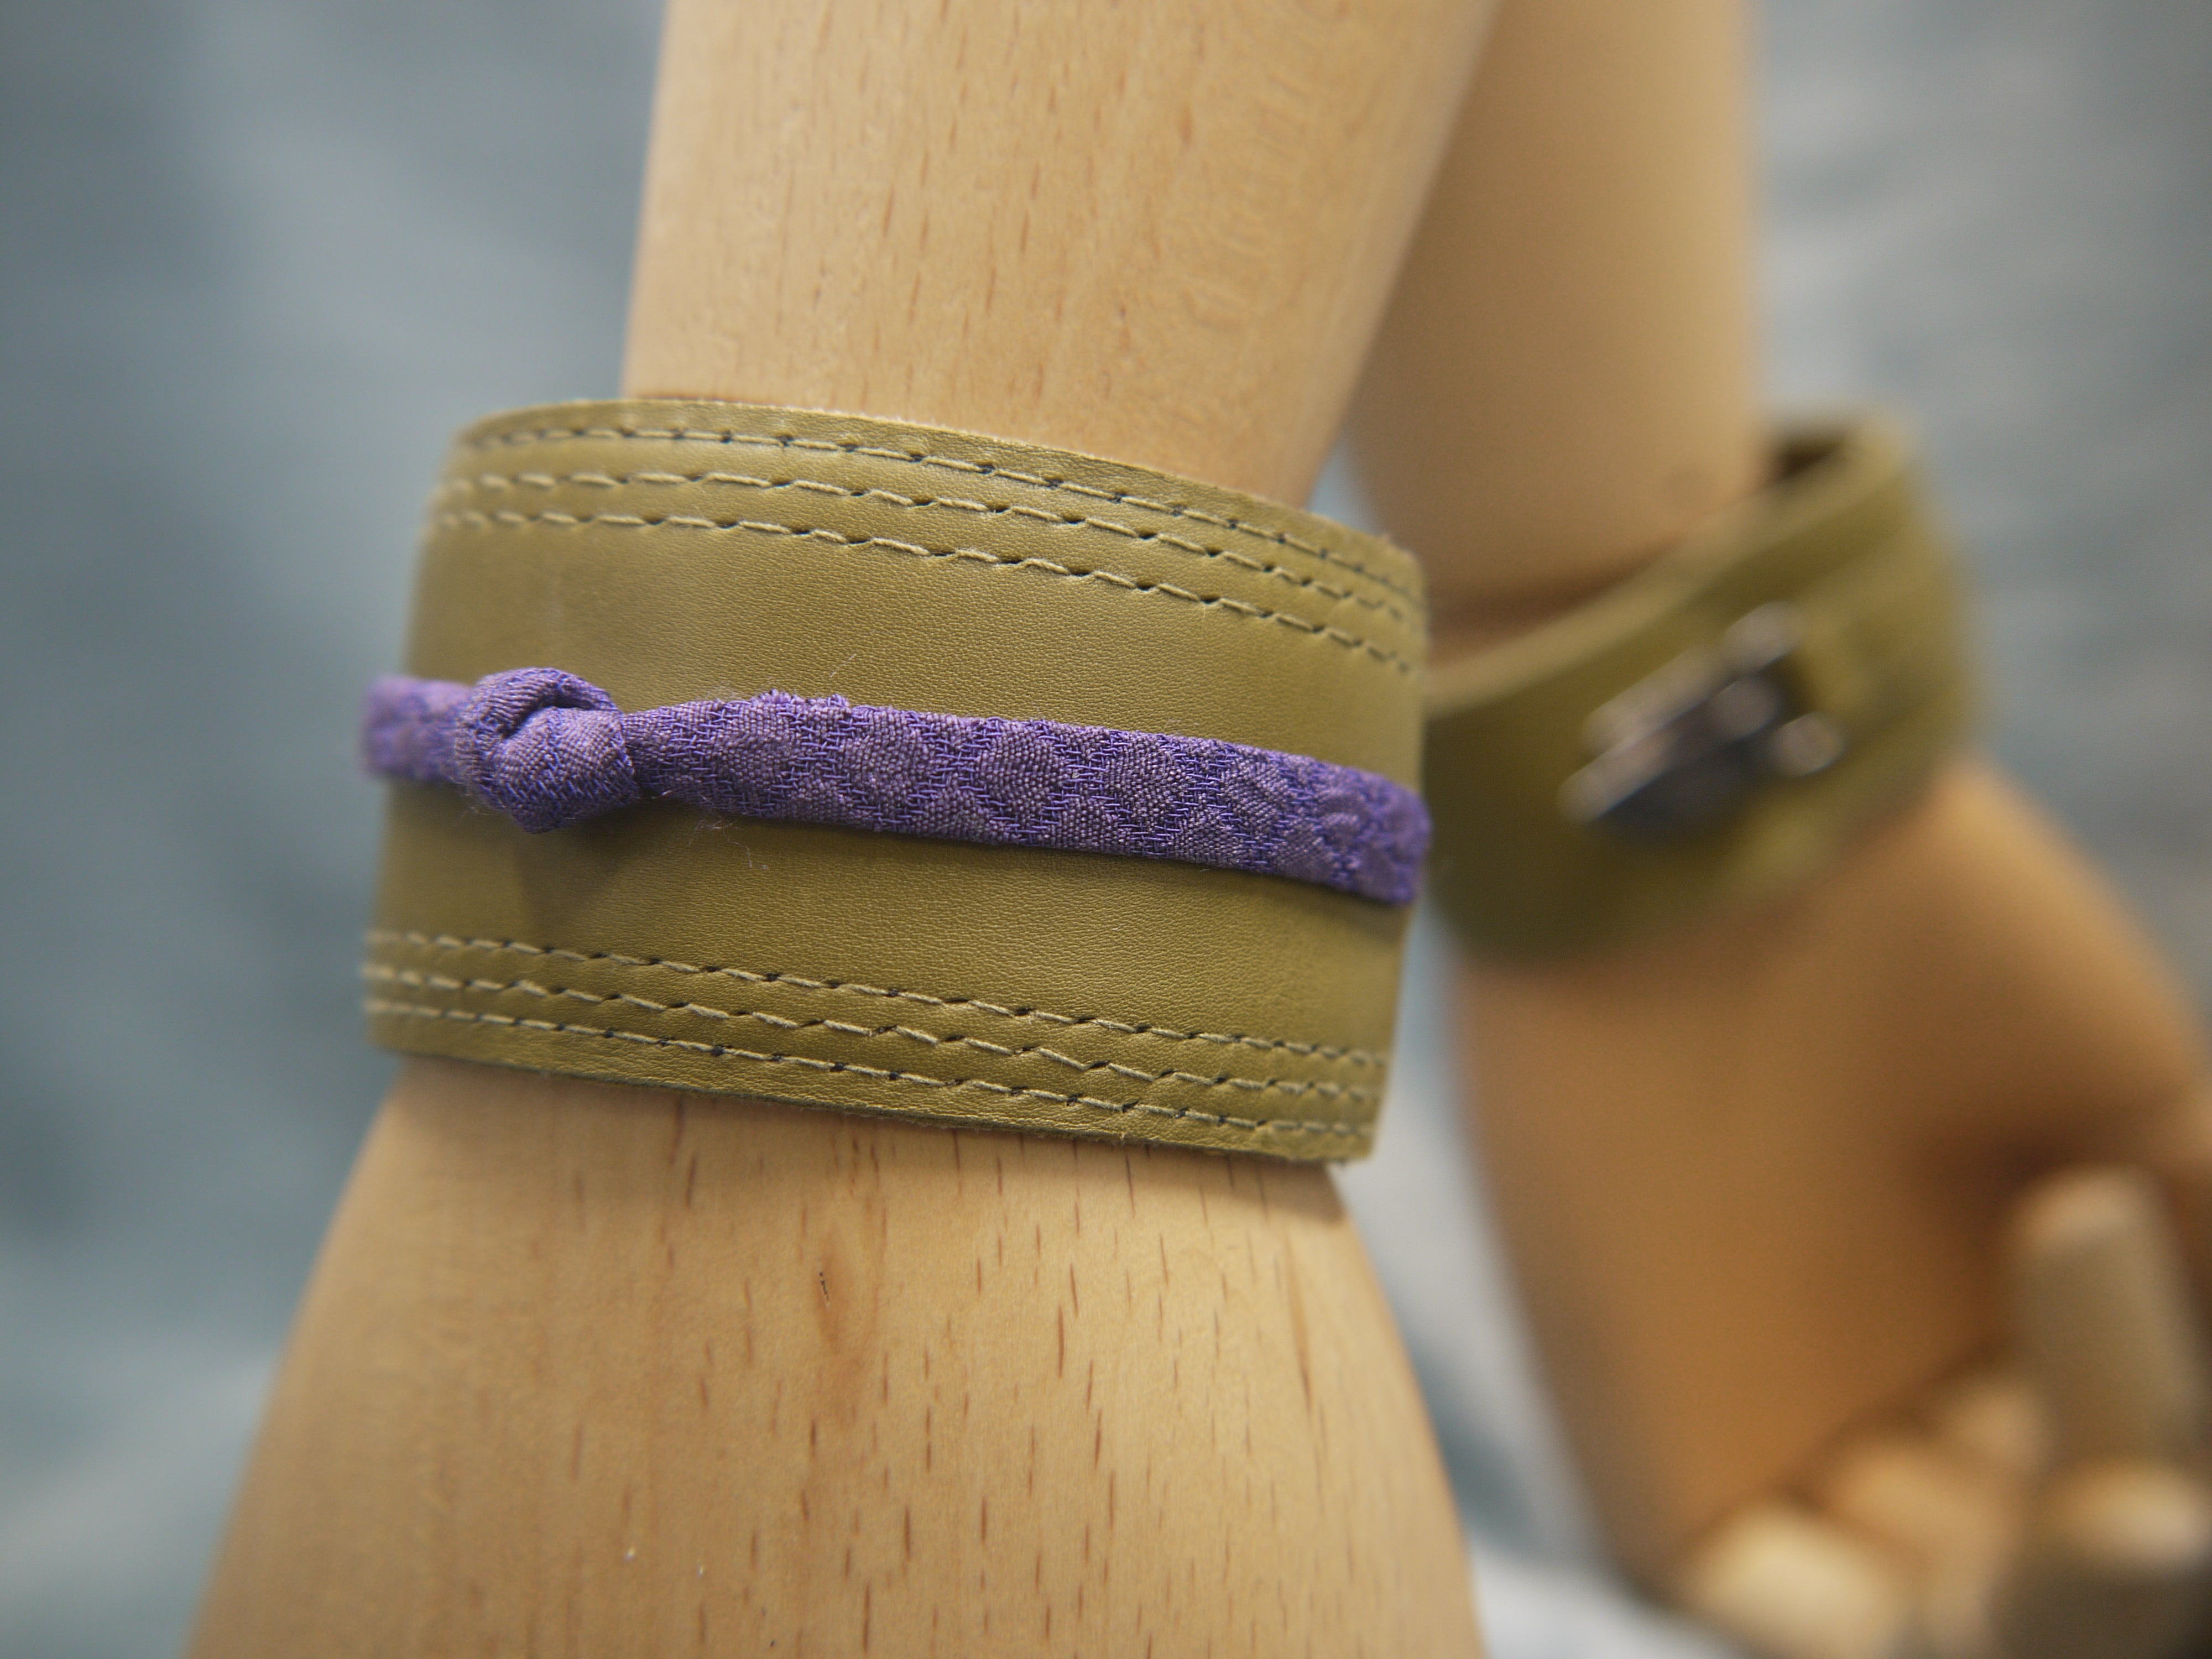 Olive green slimline Italian leather cuff with royal purple slim silk knot central on the cuff. The cugff has elegant repeat stitch detail around the edges. Close-Up Image. Two cuffs are shown. One front view, one back.